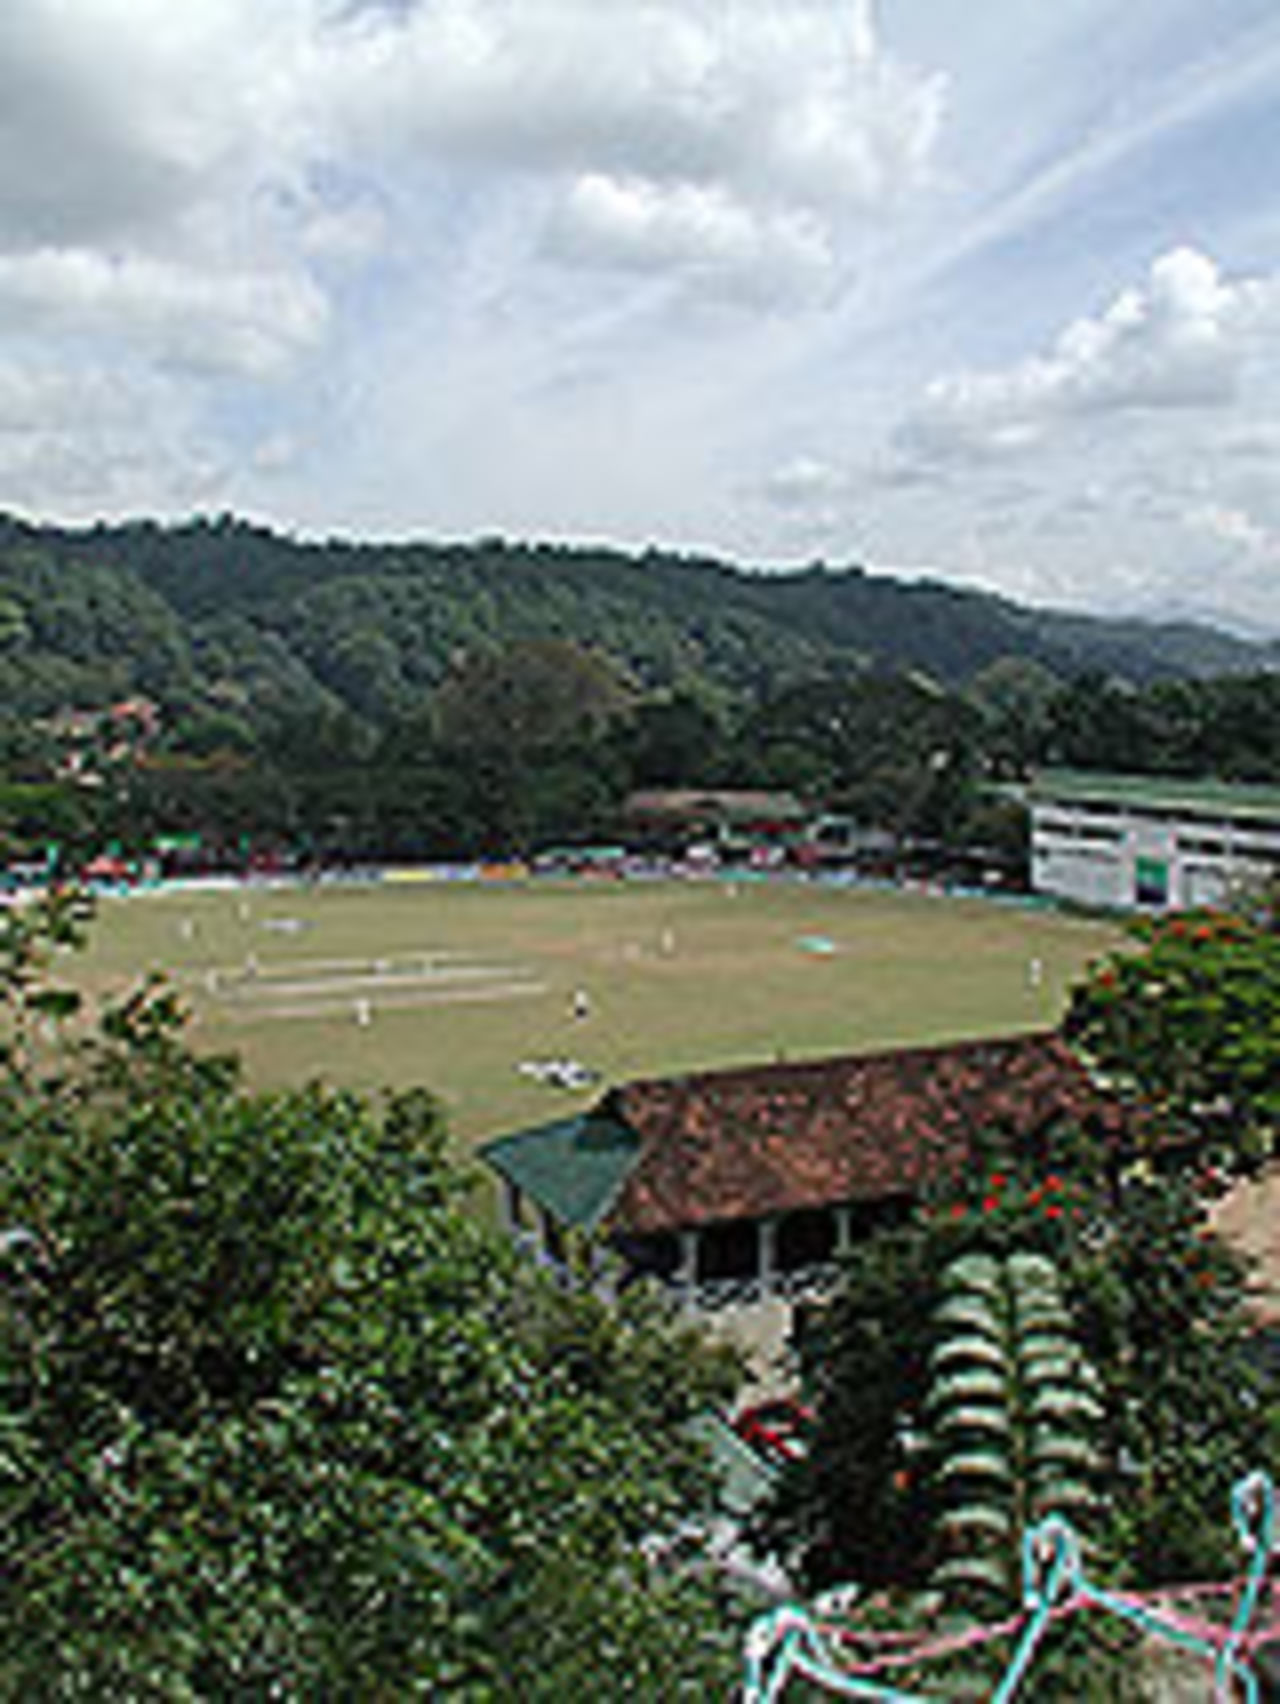 The view from the hillside at Kandy, England v Sri Lanka, 2nd Test, Day 2